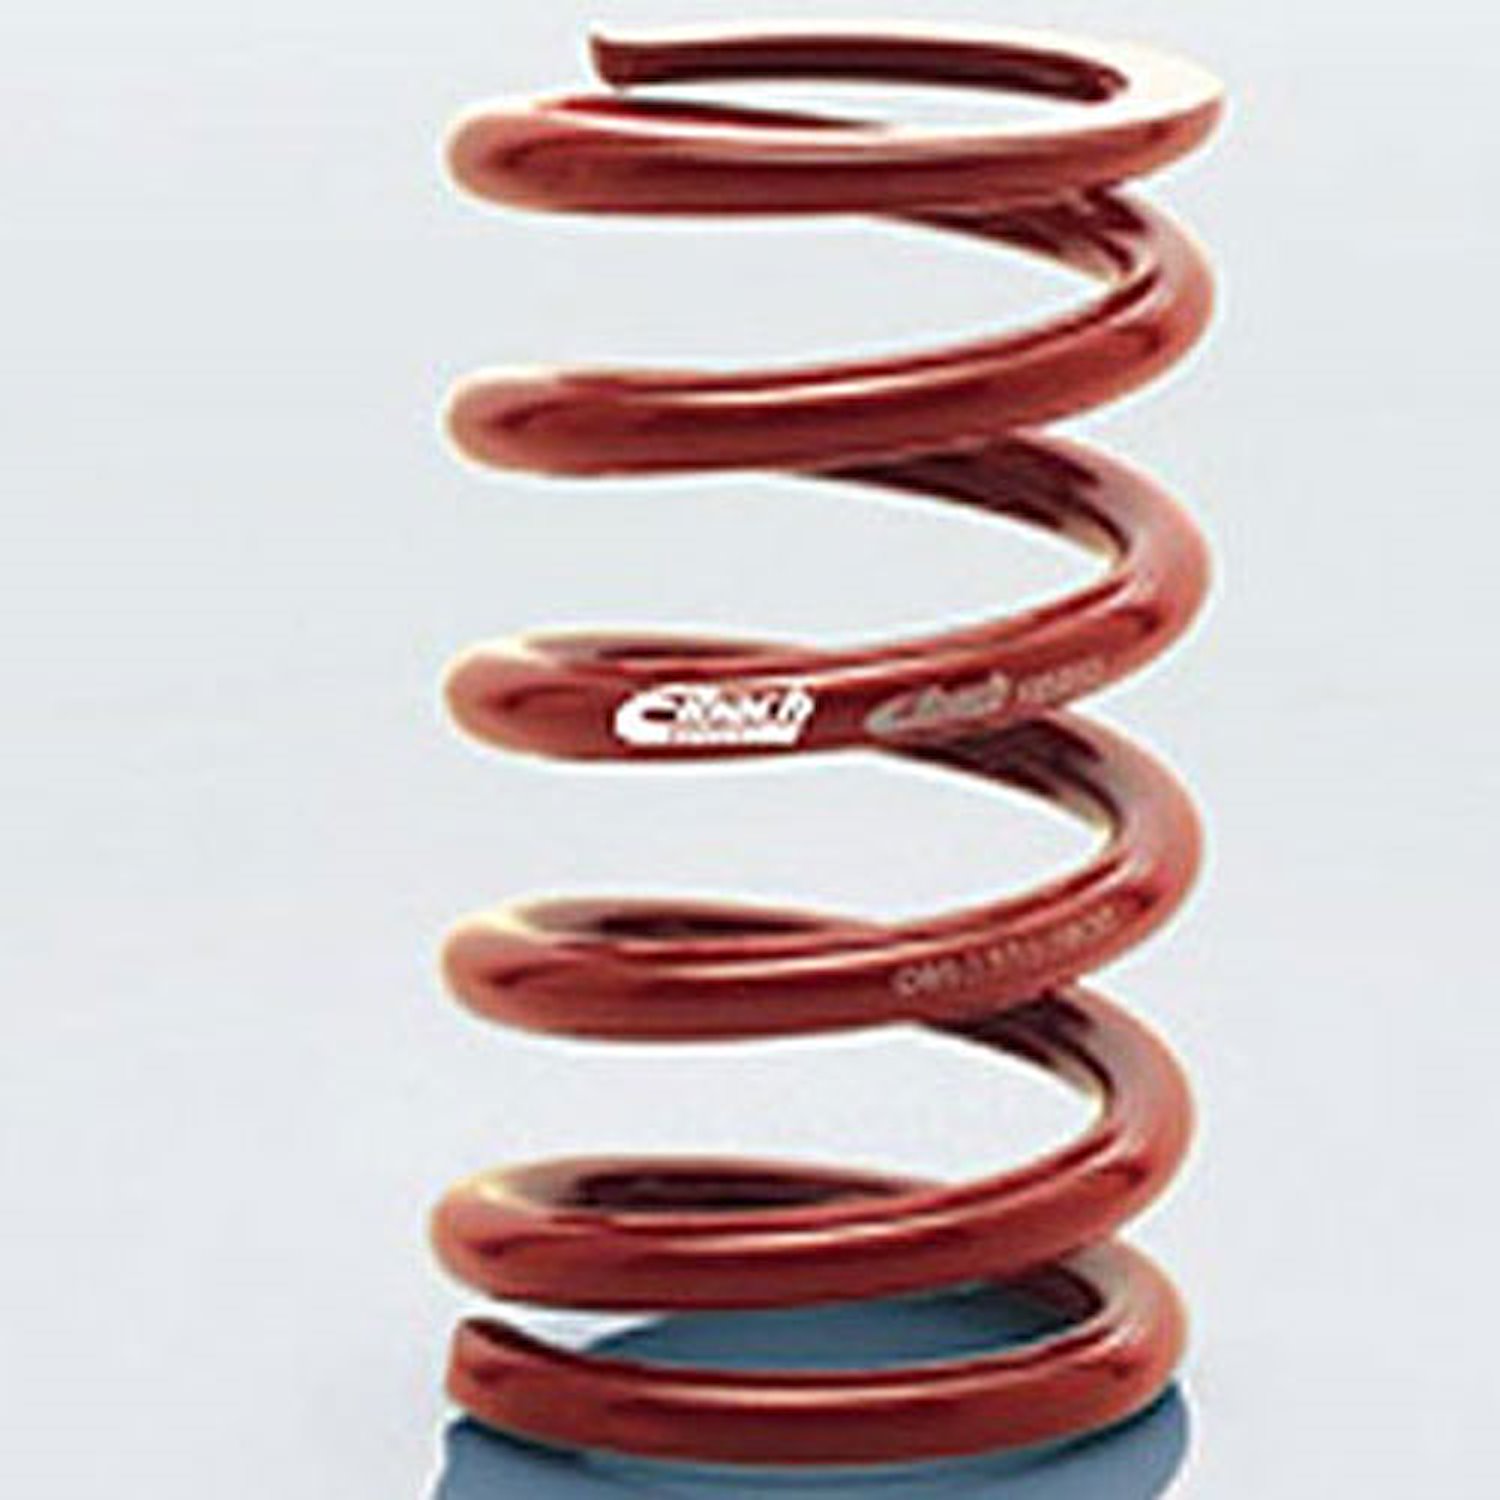 0950.550.0600 EIBACH CONVENTIONAL FRONT SPRING